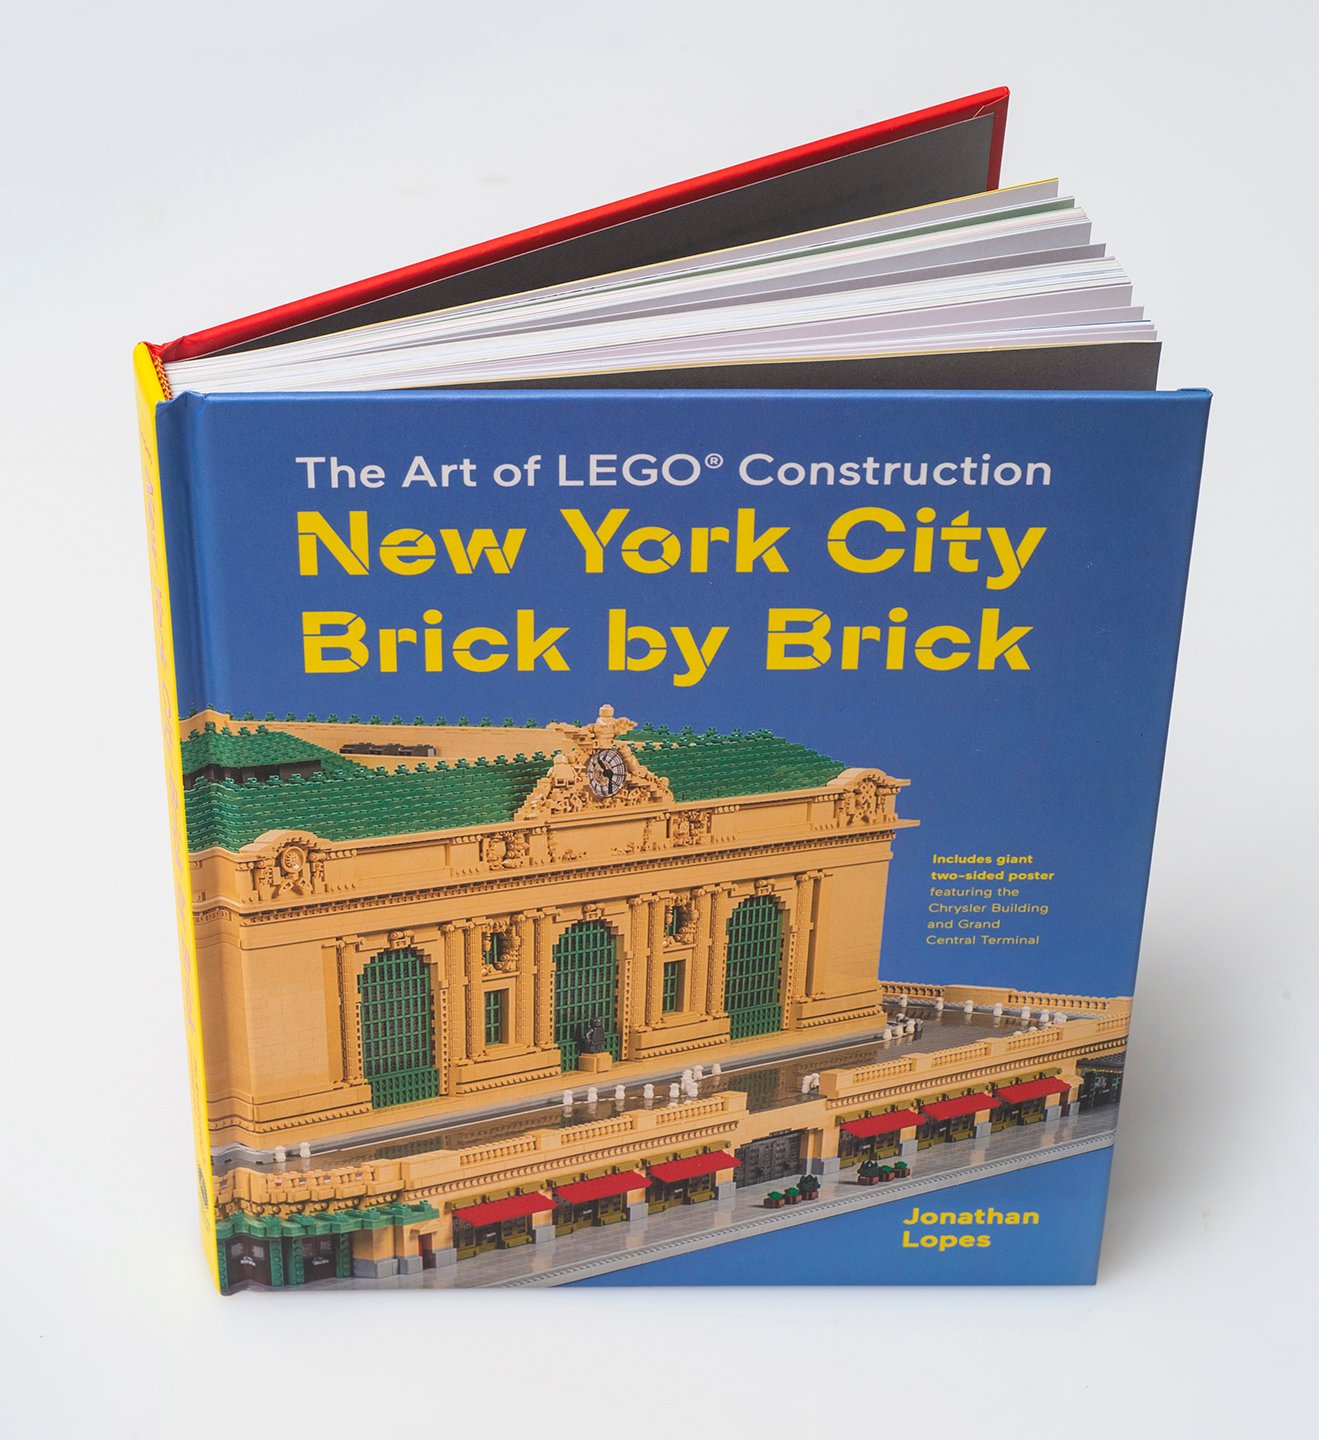 The front cover of NYC Brick by Brick by Jonathan Lopes as photographed by Bryan Regan